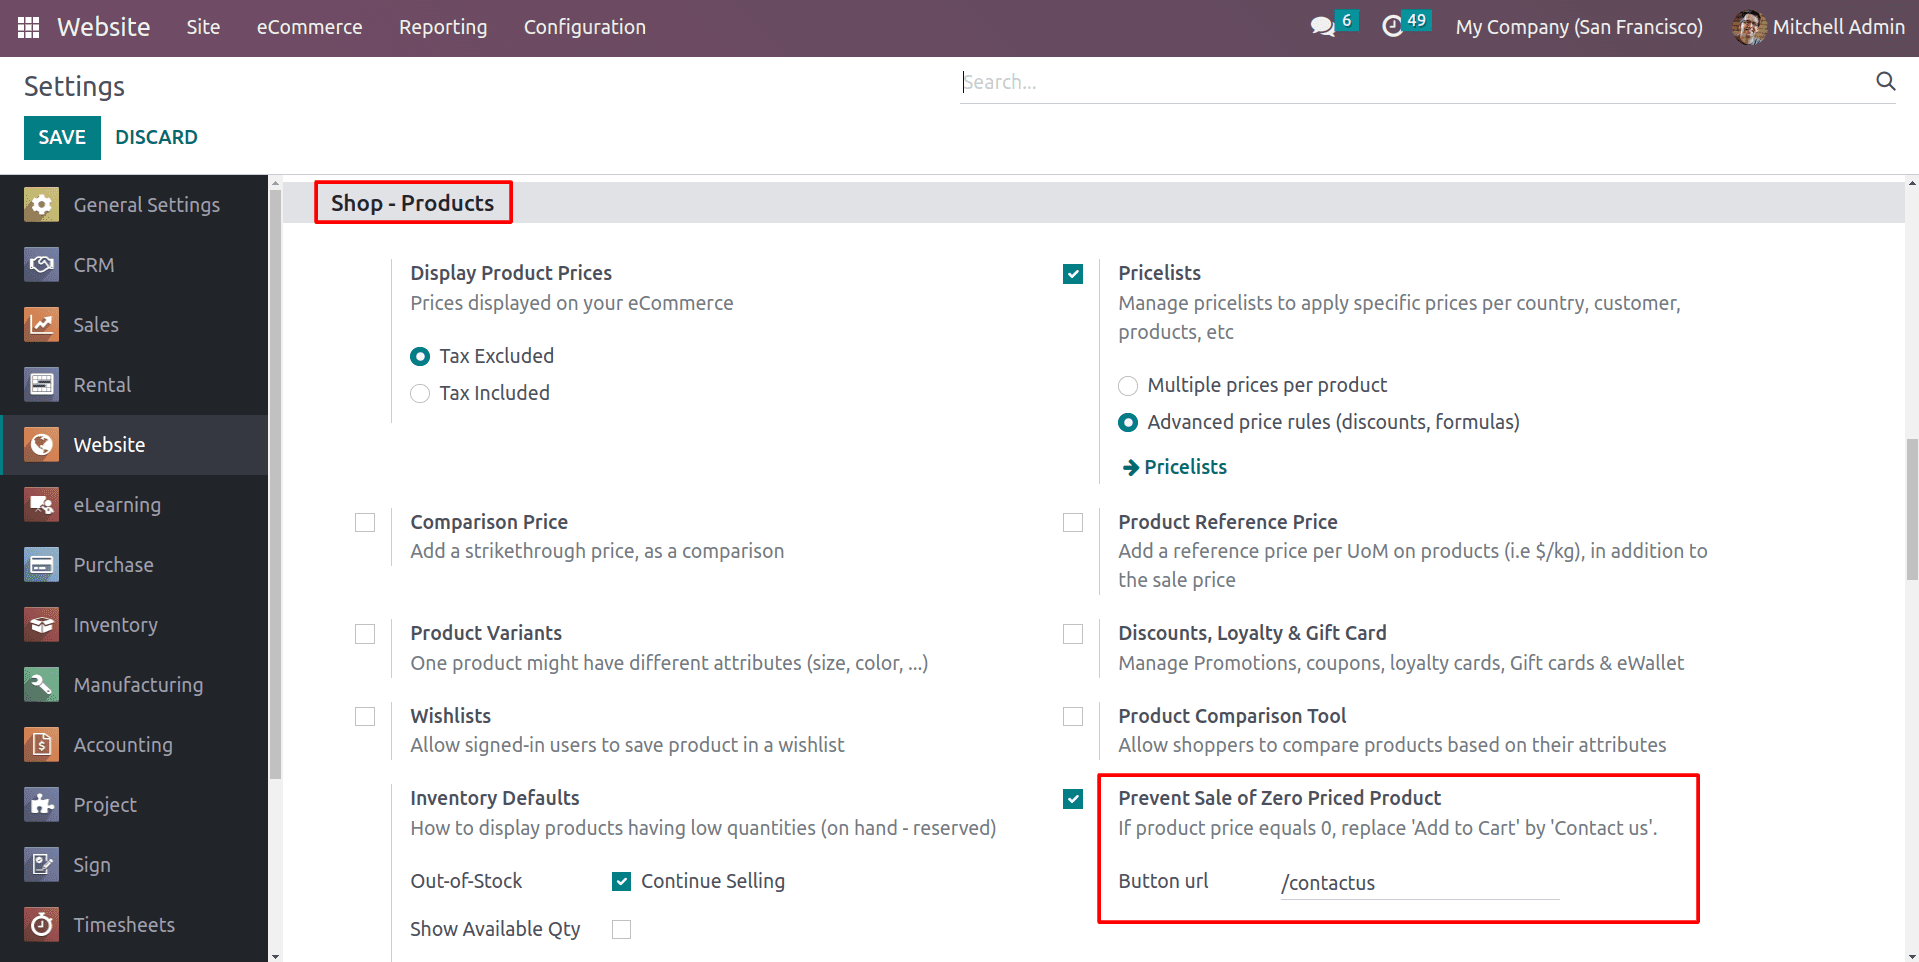 An Overview of Inventory Defaults & Preventing the Sale of Zero-priced Products in Odoo 16 Website-cybrosys